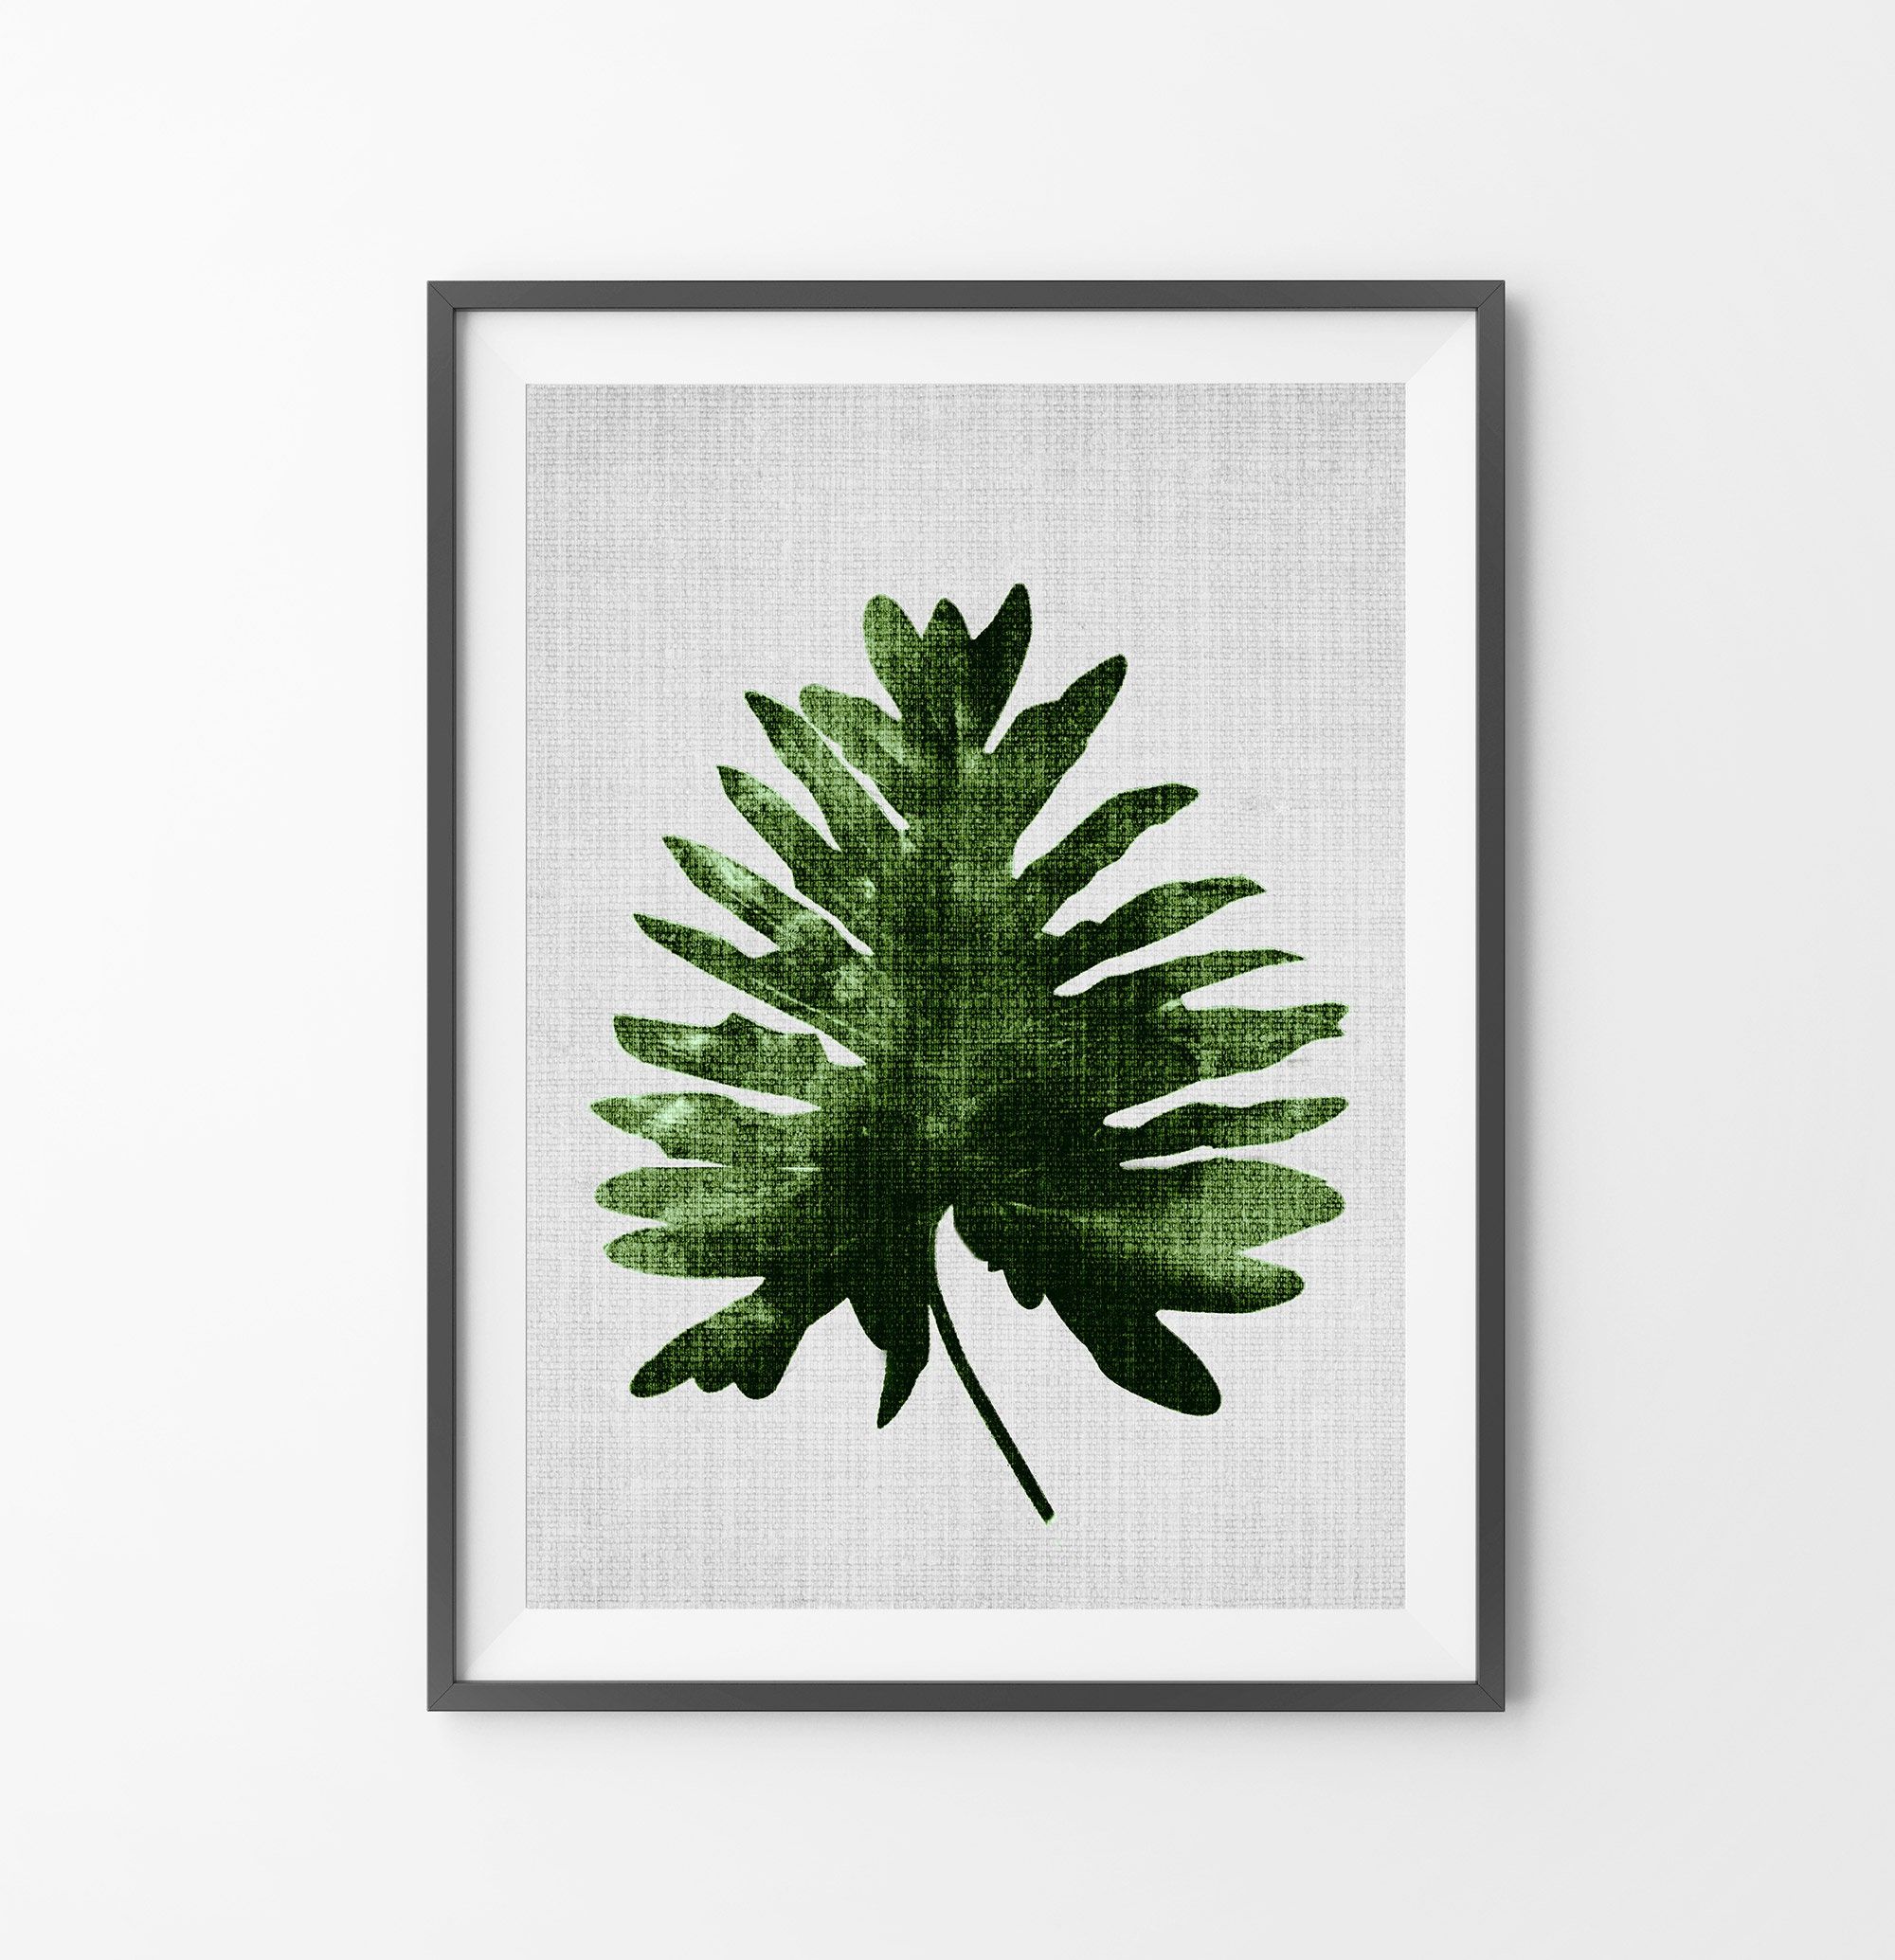 Palm Leaf Print, Botanical Wall Art Decor, Digital Pertaining To Best And Newest Palm Leaves Wall Art (View 11 of 20)